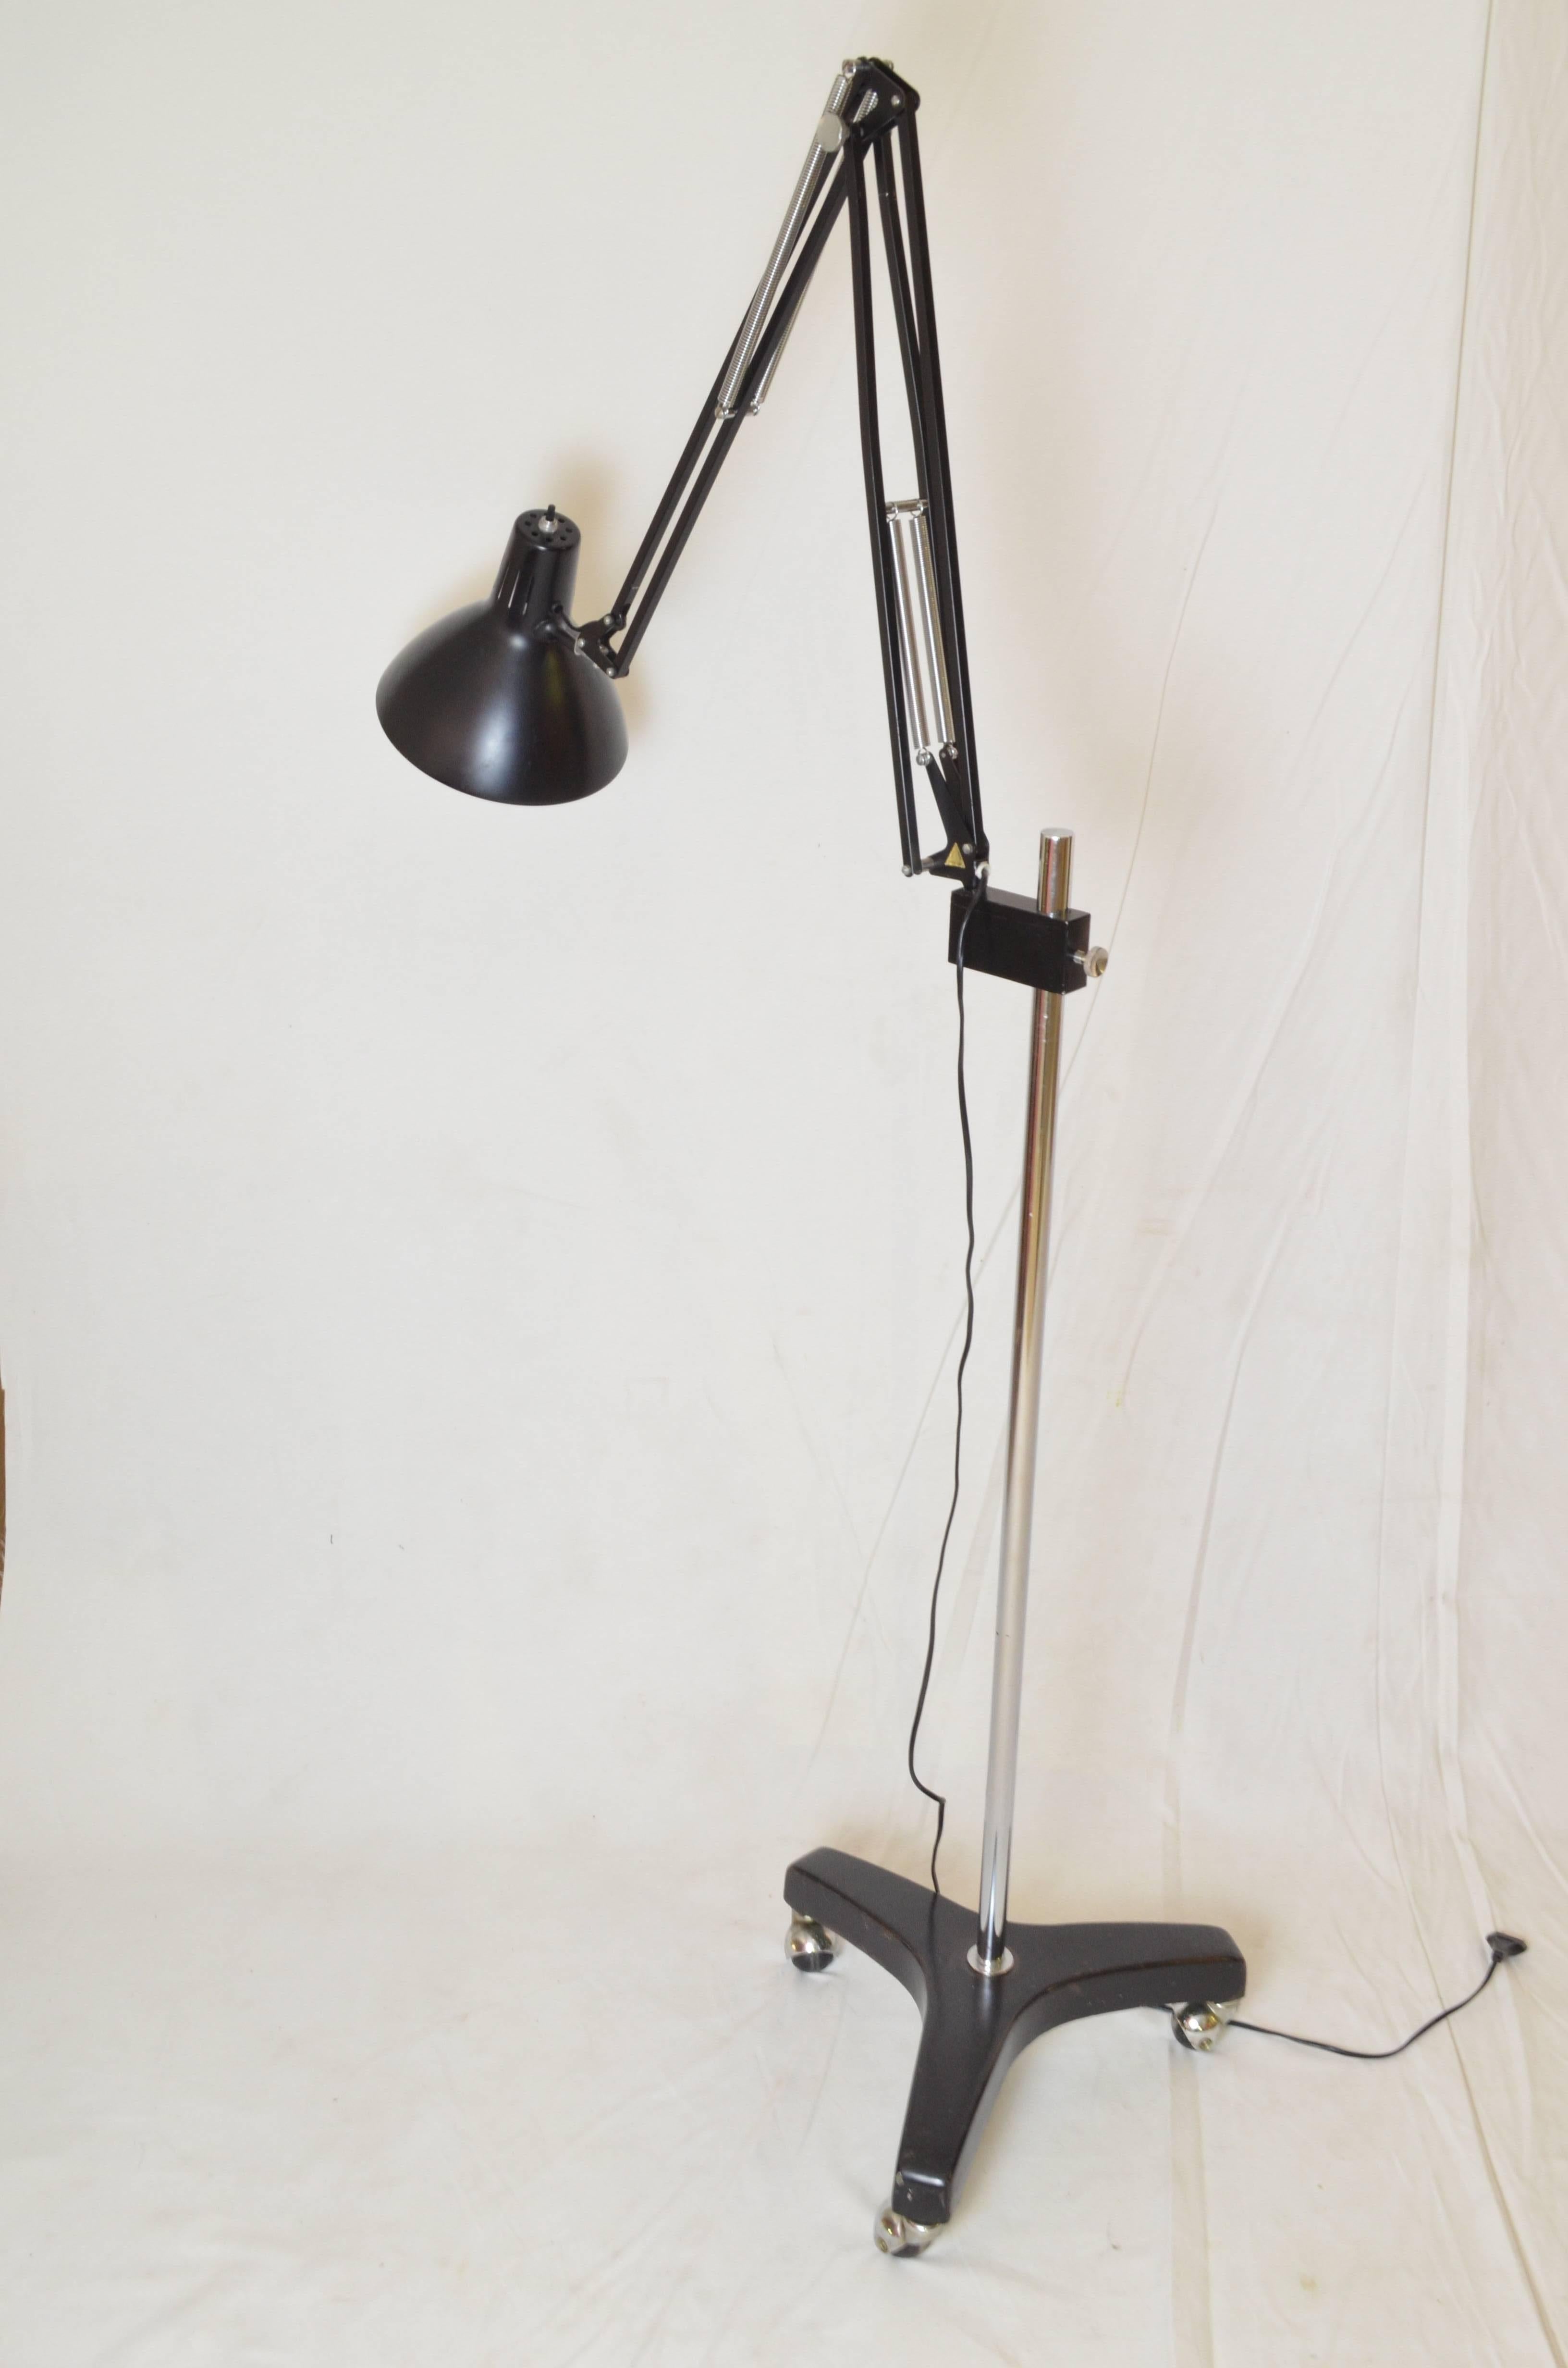 The Naska lamps is a classic from 1933. Simple and functional, with a revolving, adjustable arm. It comes in black color showing the original brass tag stating Naska Loris Norway Original. This item has been produced around 1970s. It is perfect to